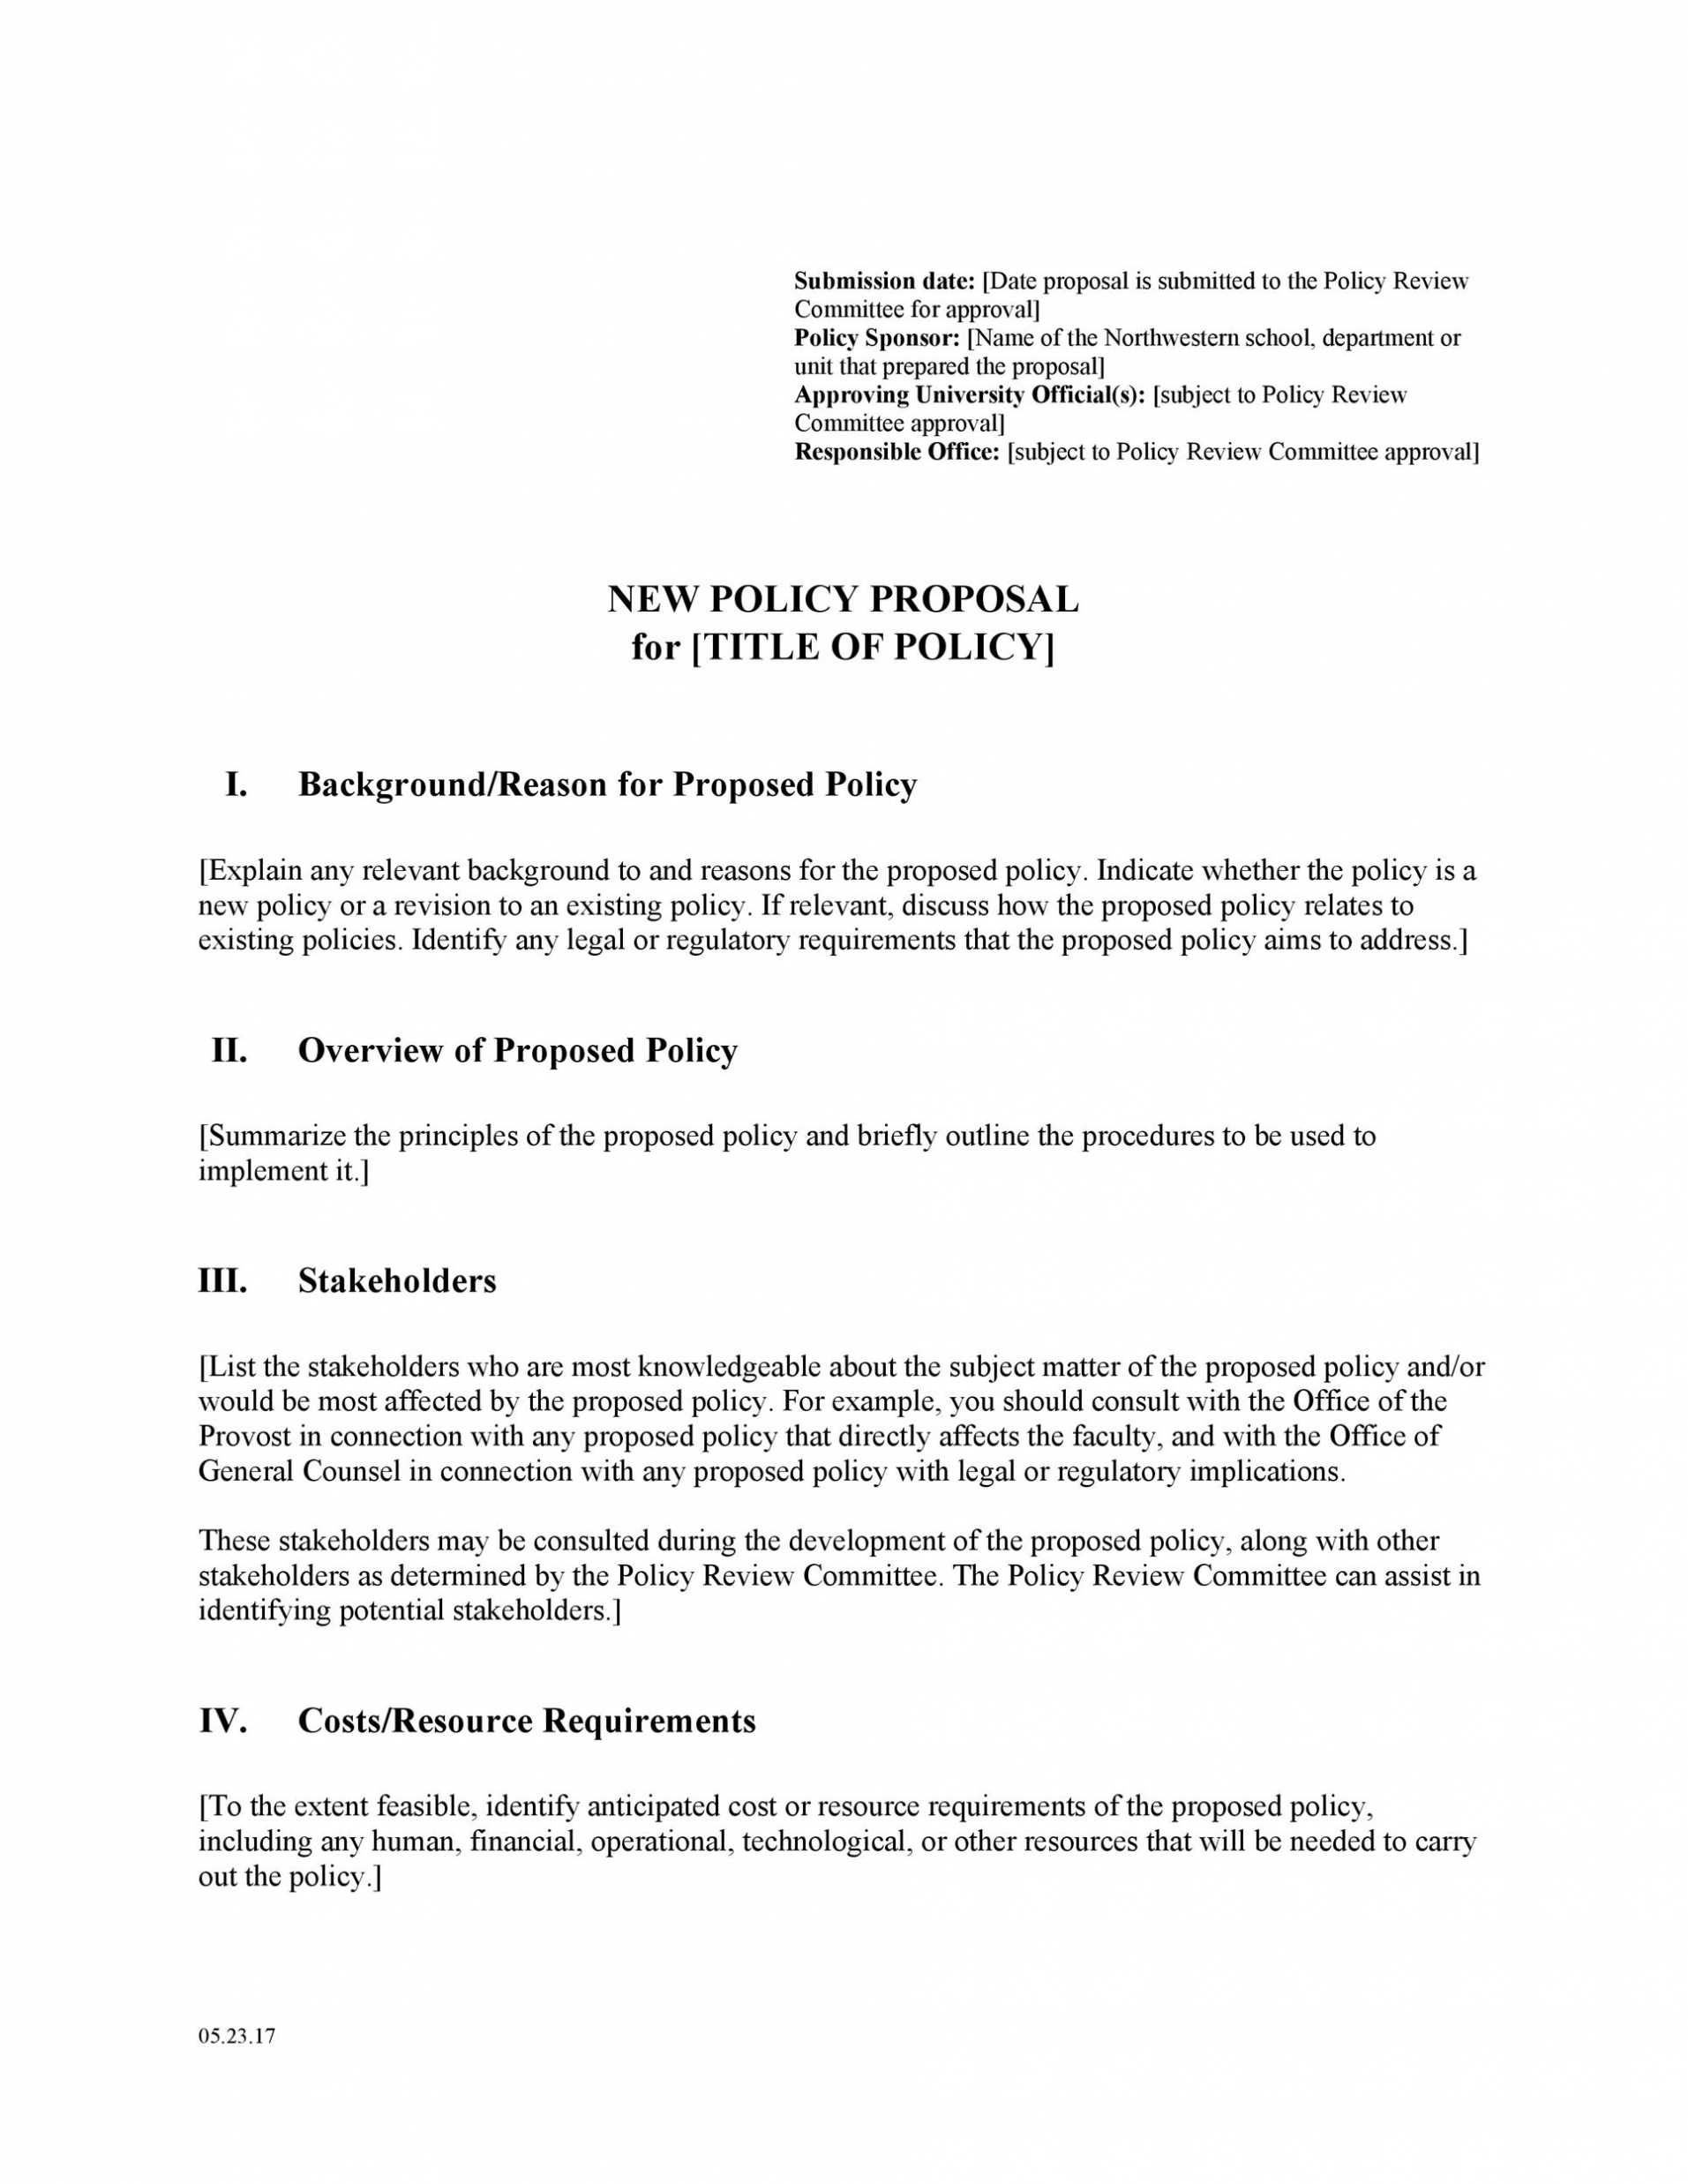 30 Professional Policy Proposal Templates [&amp; Examples] ᐅ with Policy Proposal Template